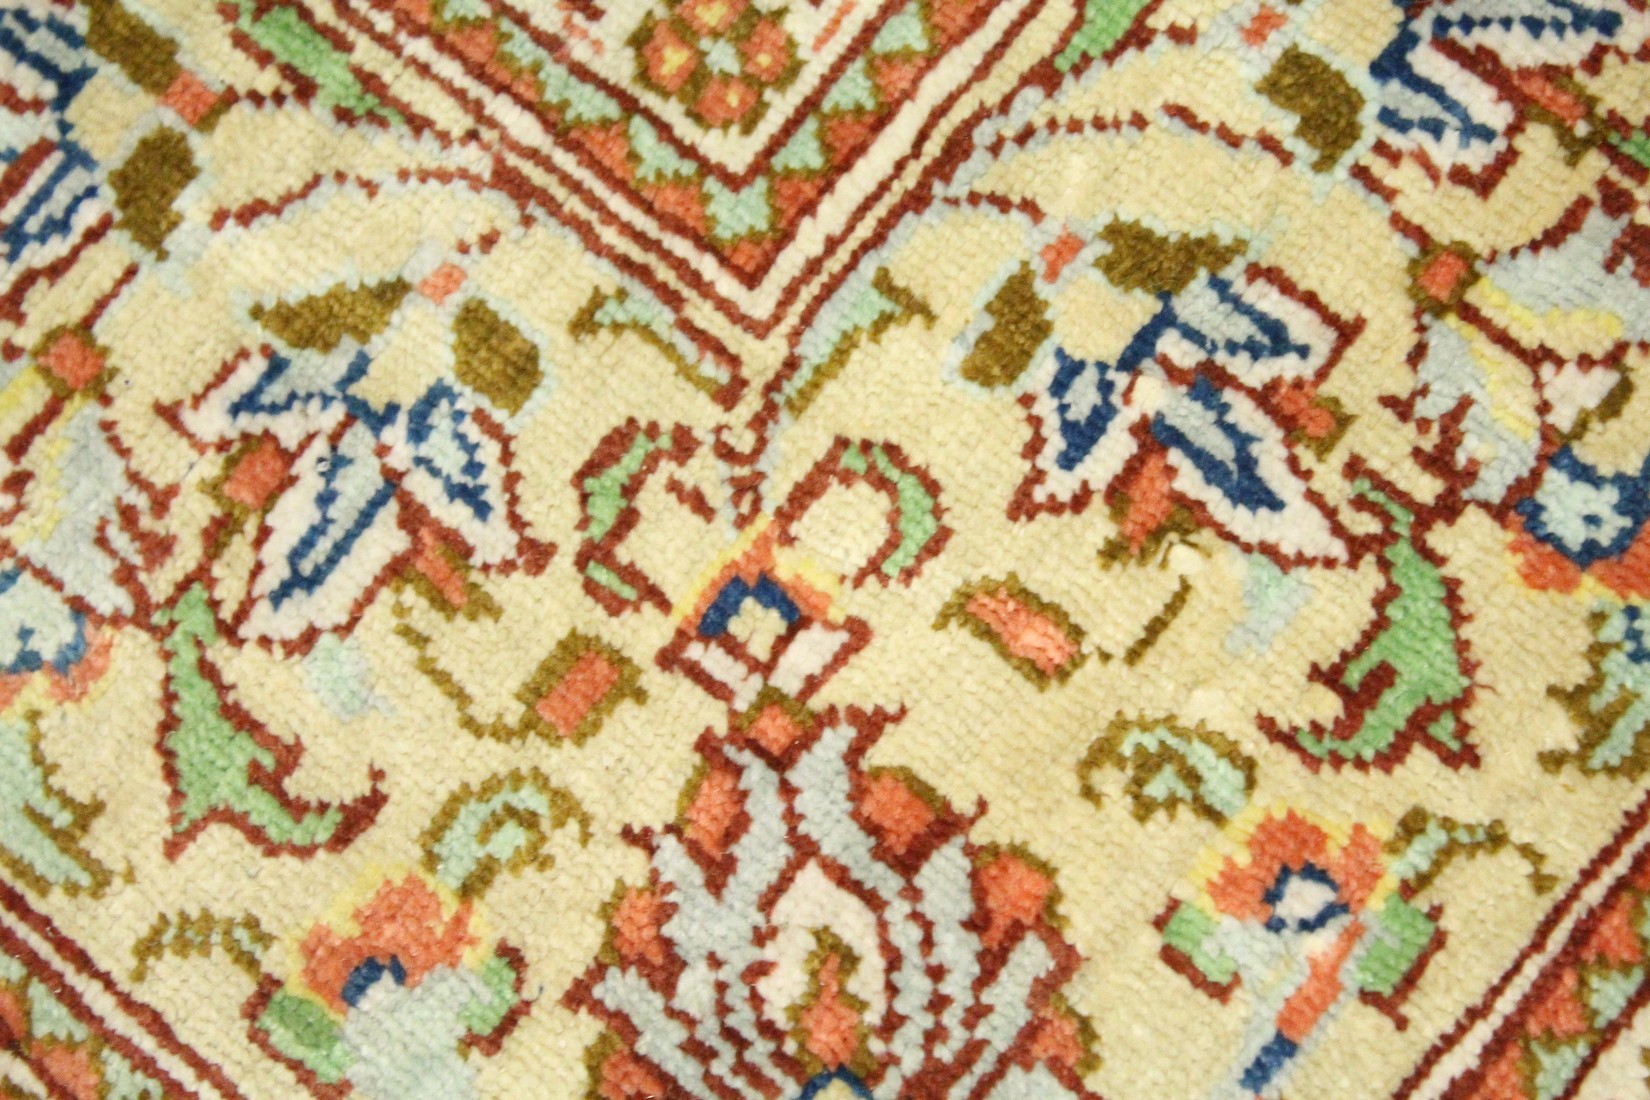 A PERSIAN SILK QUOM RUG, blue ground with all over floral decoration. 4ft 10ins x 3ft 1ins. - Image 4 of 6